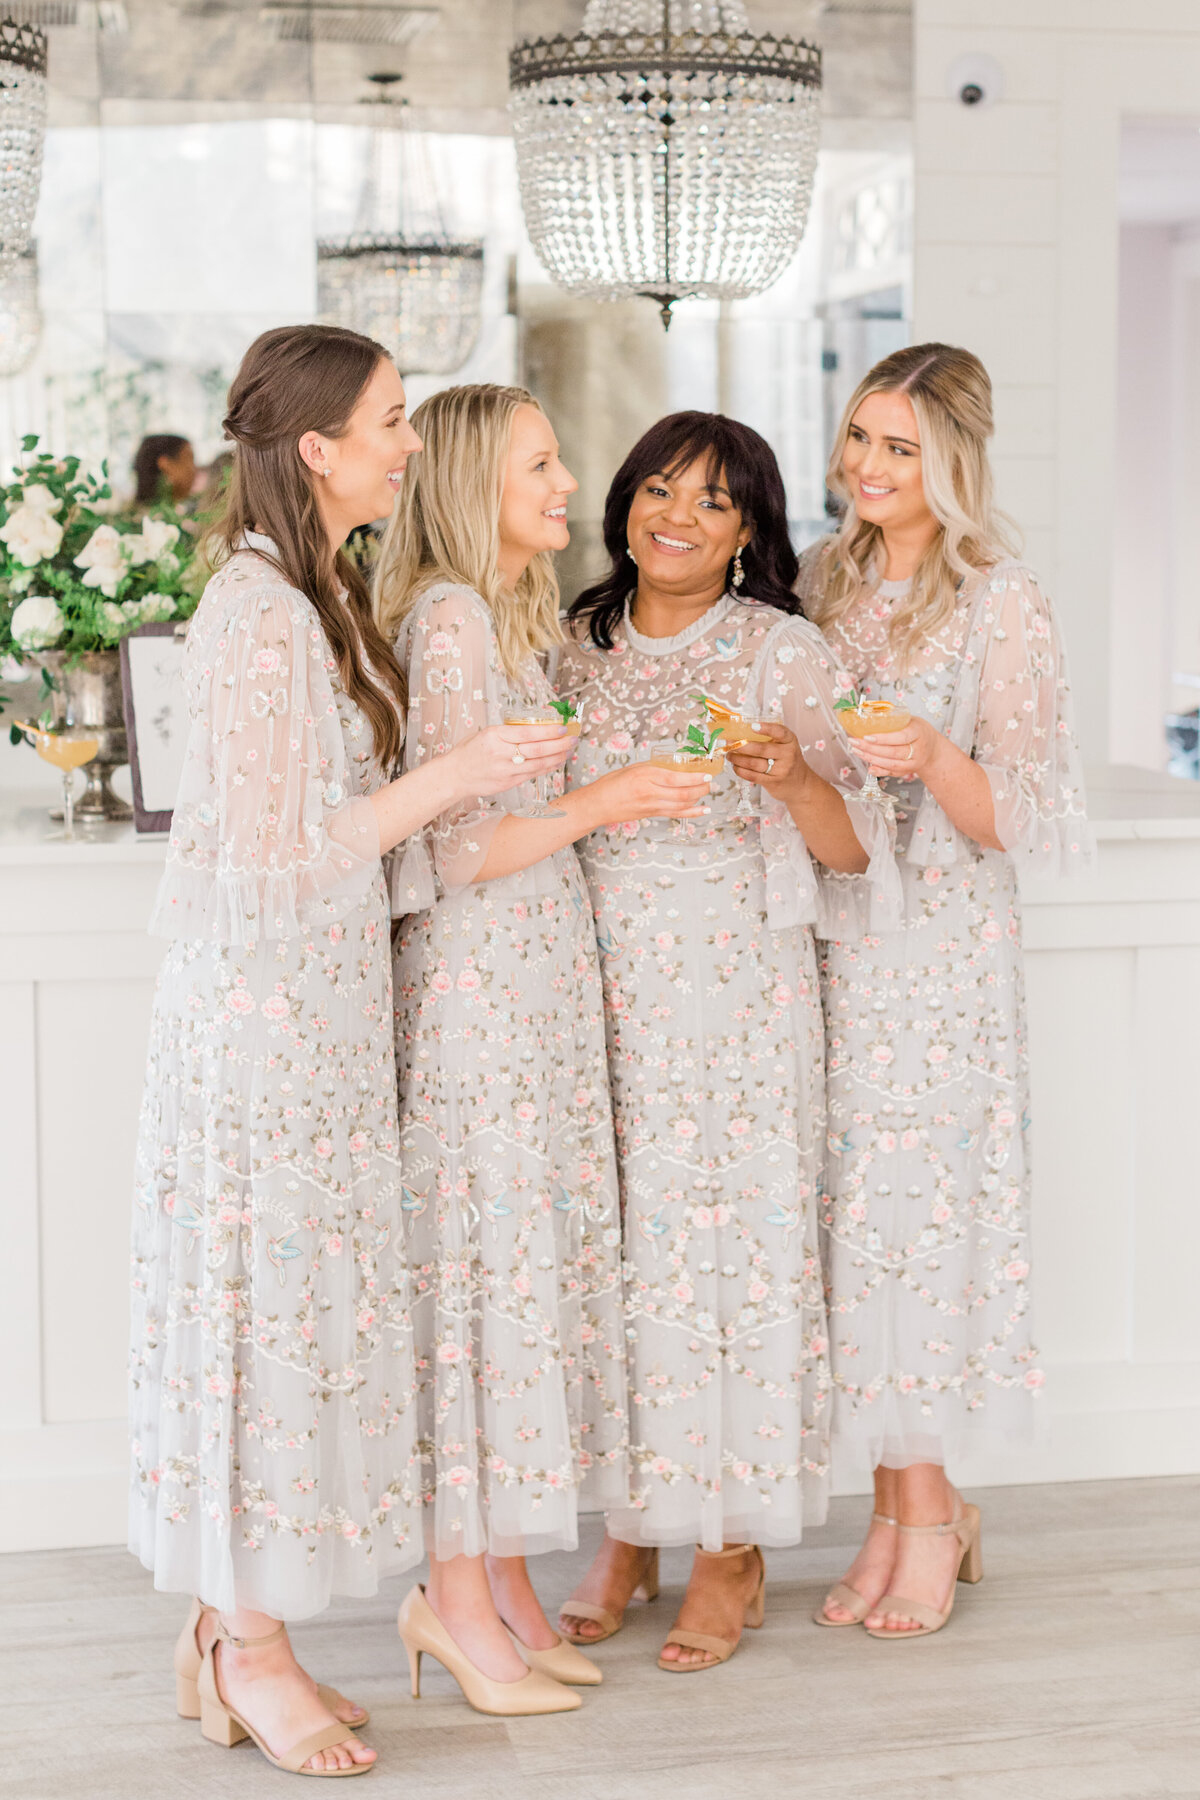 Bridesmaids clink their cocktail glasses at a wedding